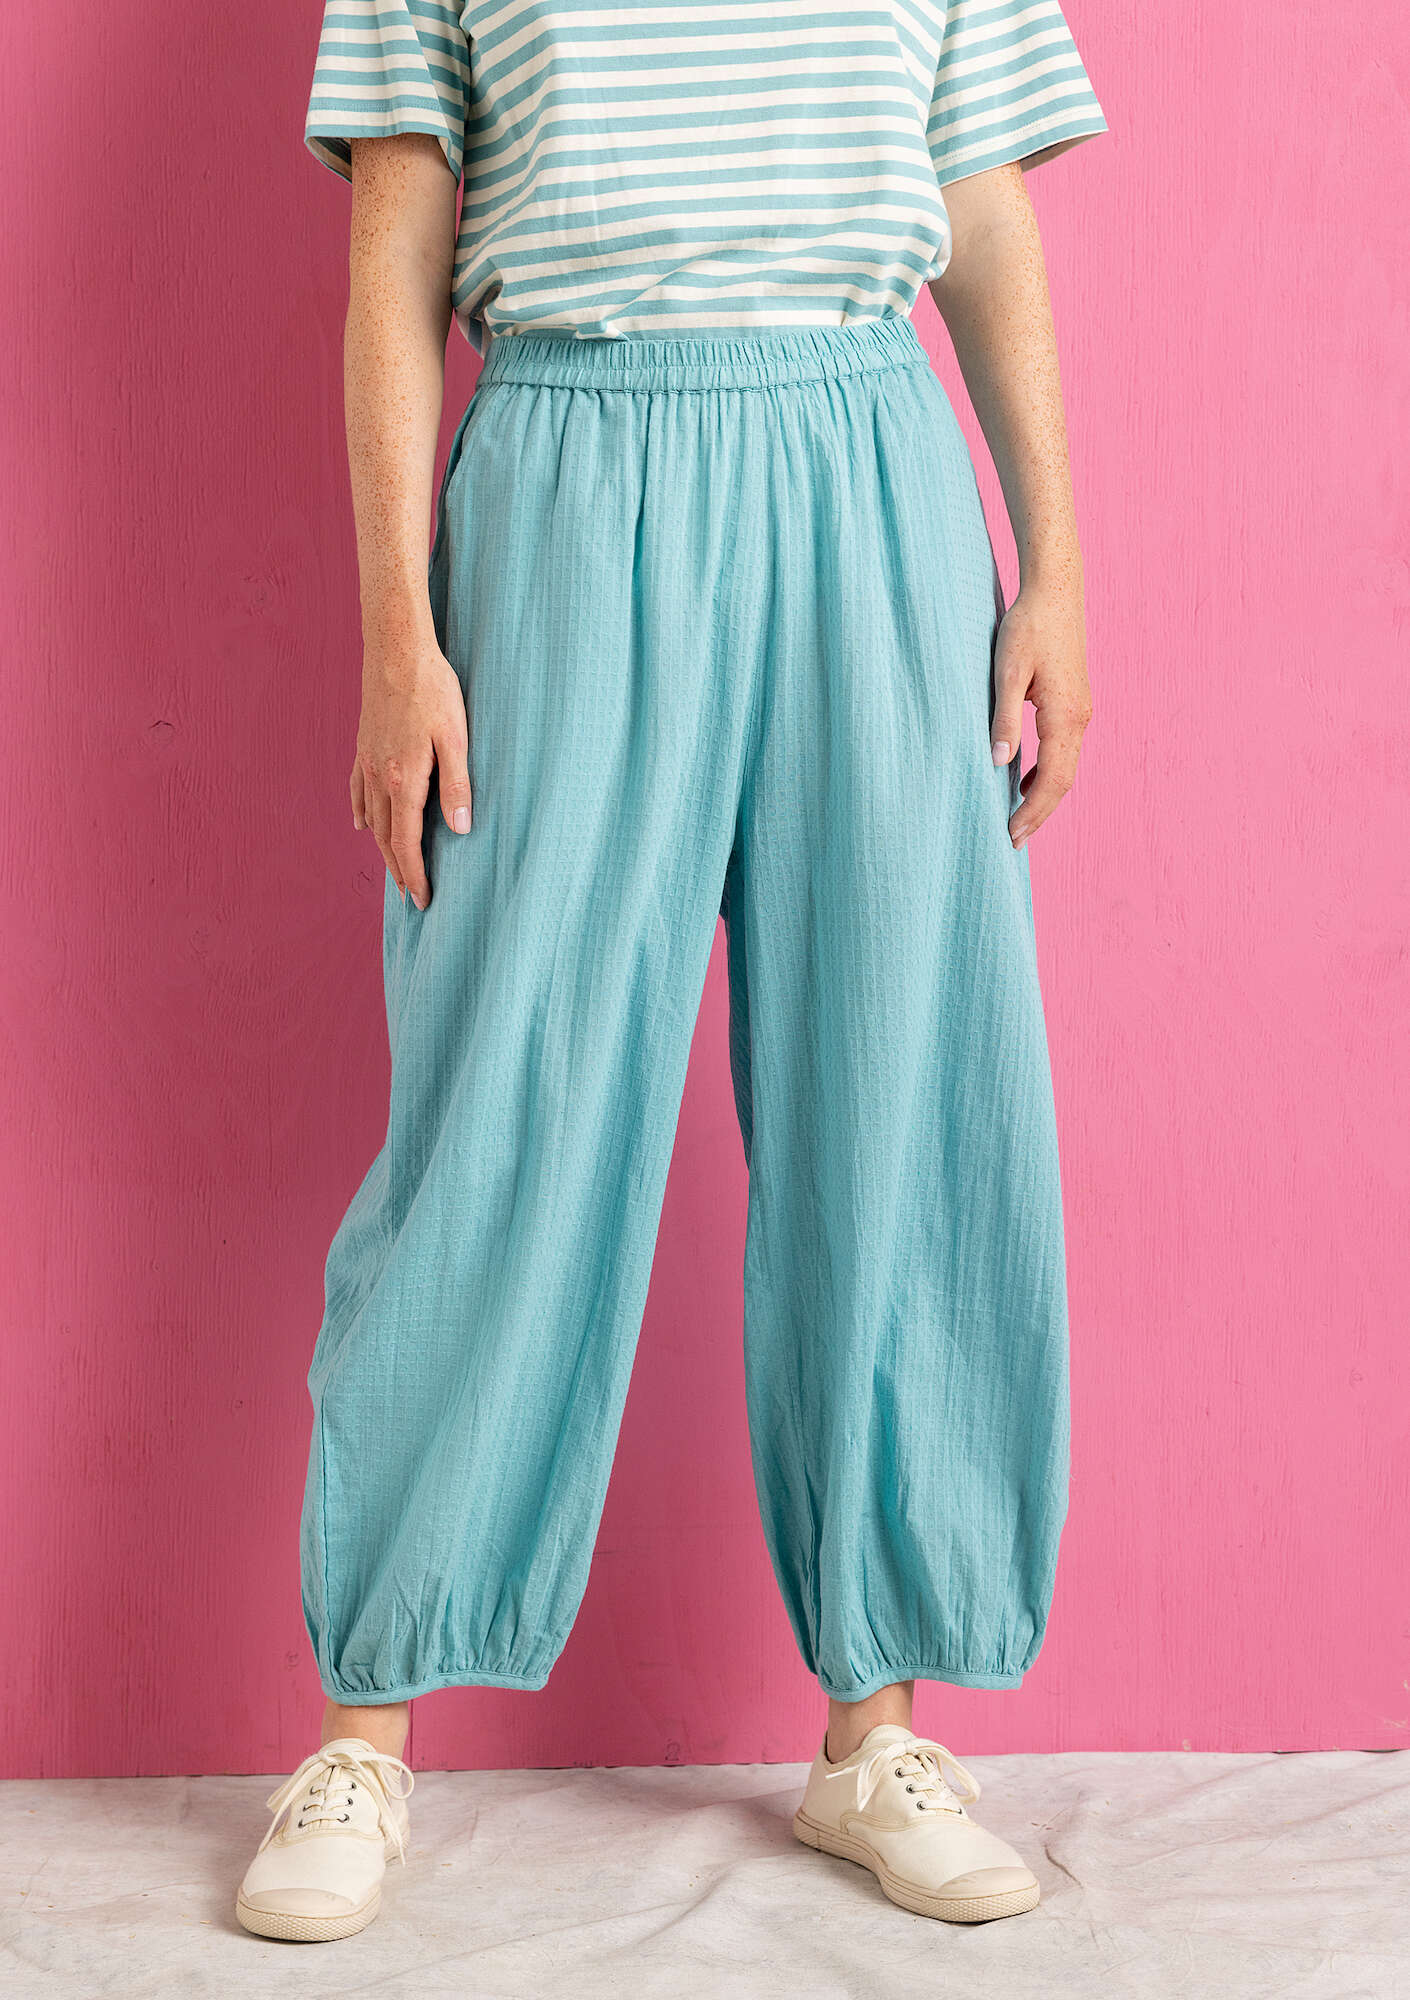 “Hilda” harem trousers in an organic cotton weave meadow stream thumbnail